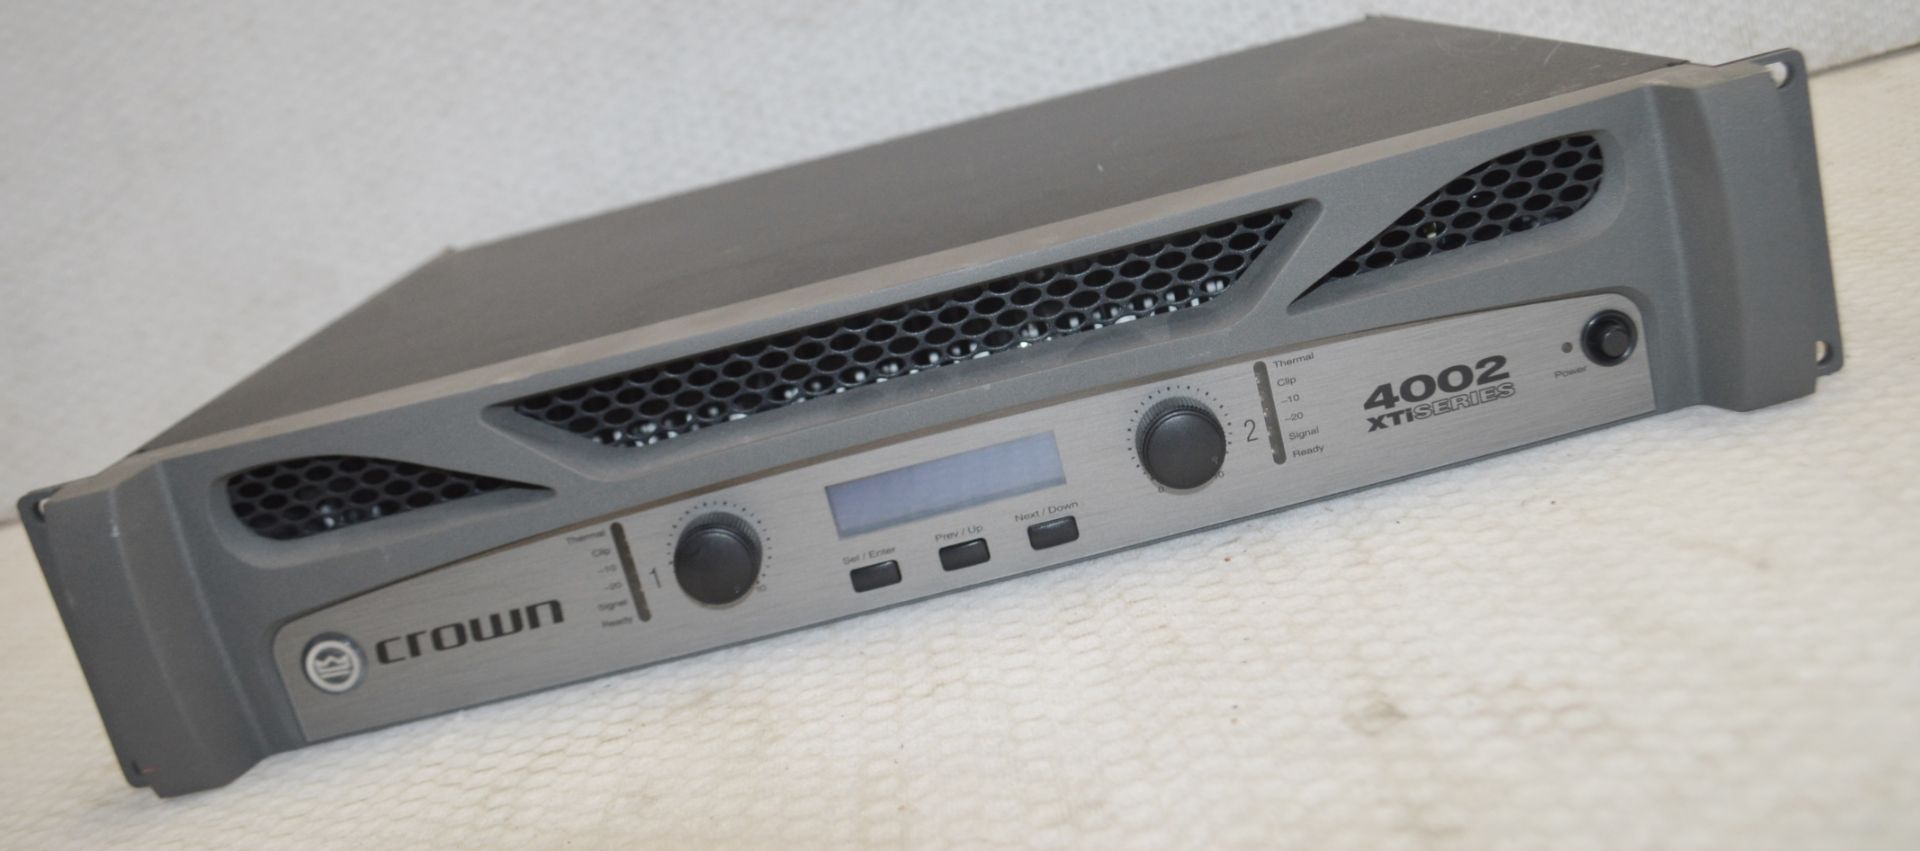 1 x Crown XTi 4002 Two-channel 1200W Power Amplifier - RRP £875 - Recently Removed From A Commercial - Image 2 of 6